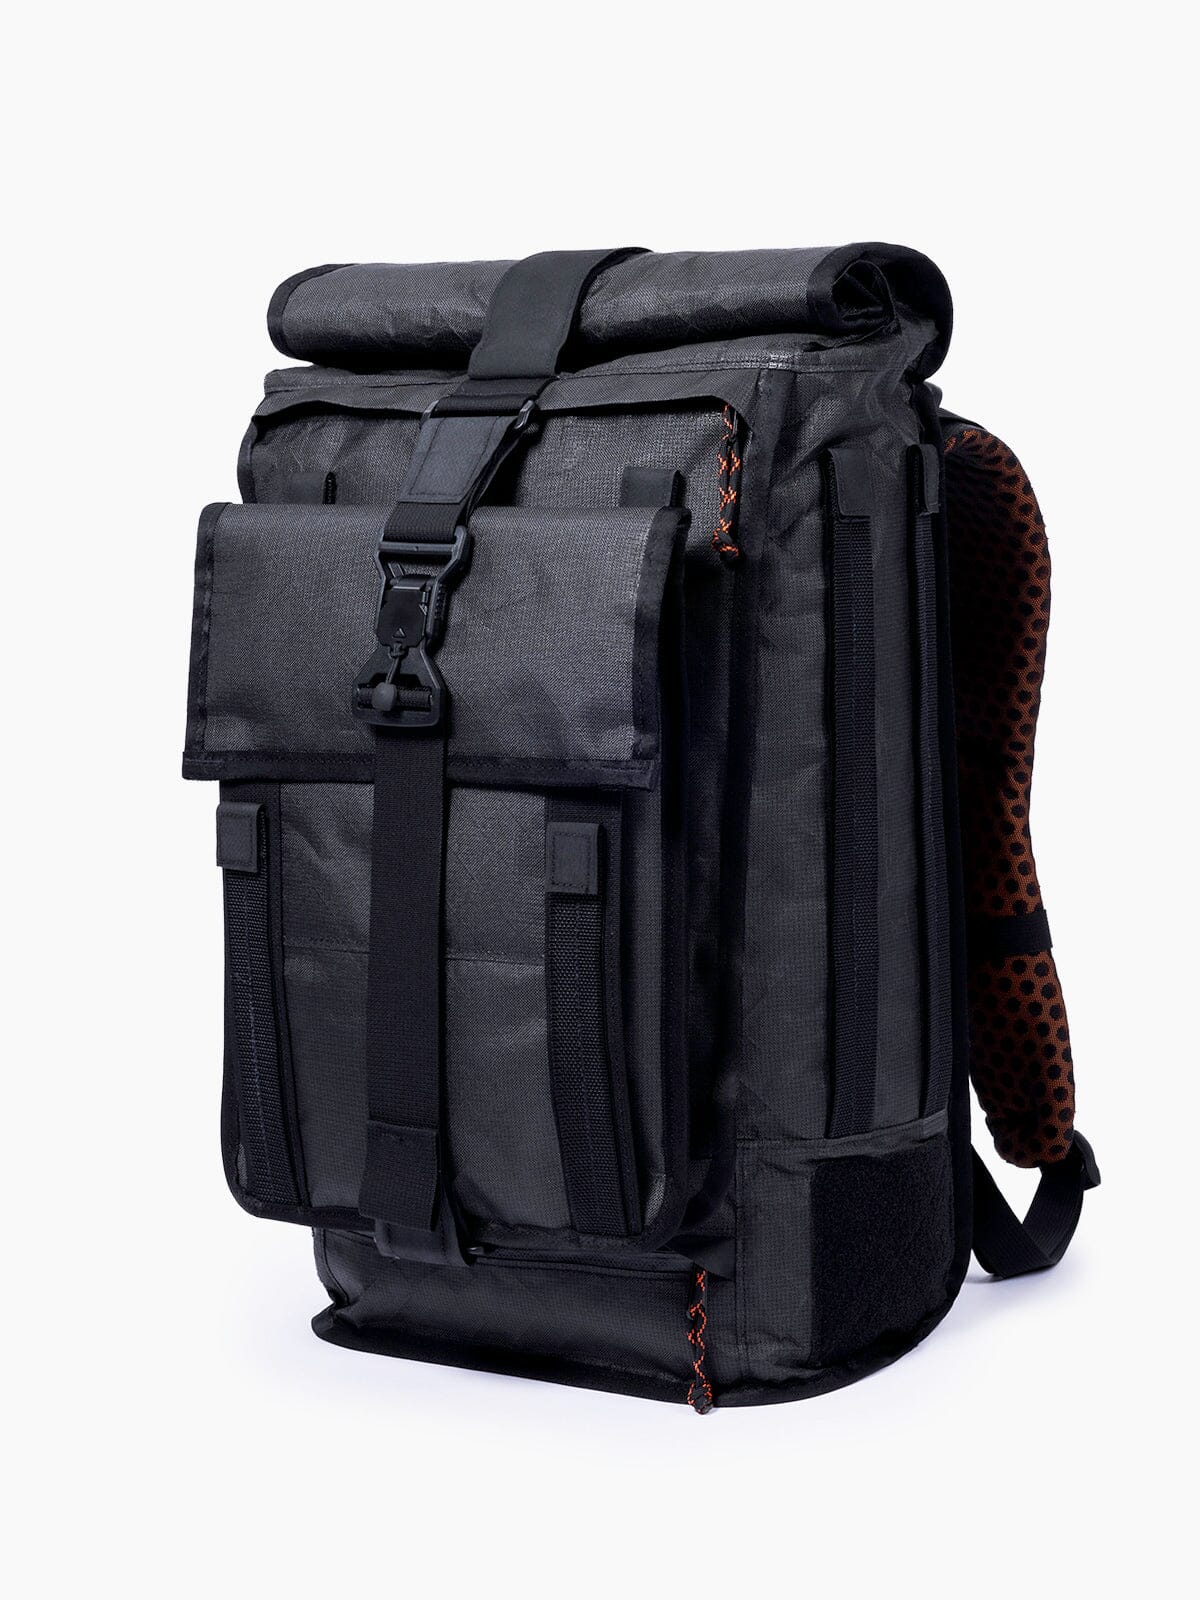 Mission Workshop X Carryology by Mission Workshop - Weatherproof Bags & Technical Apparel - San Francisco & Los Angeles - Built to endure - Guaranteed forever